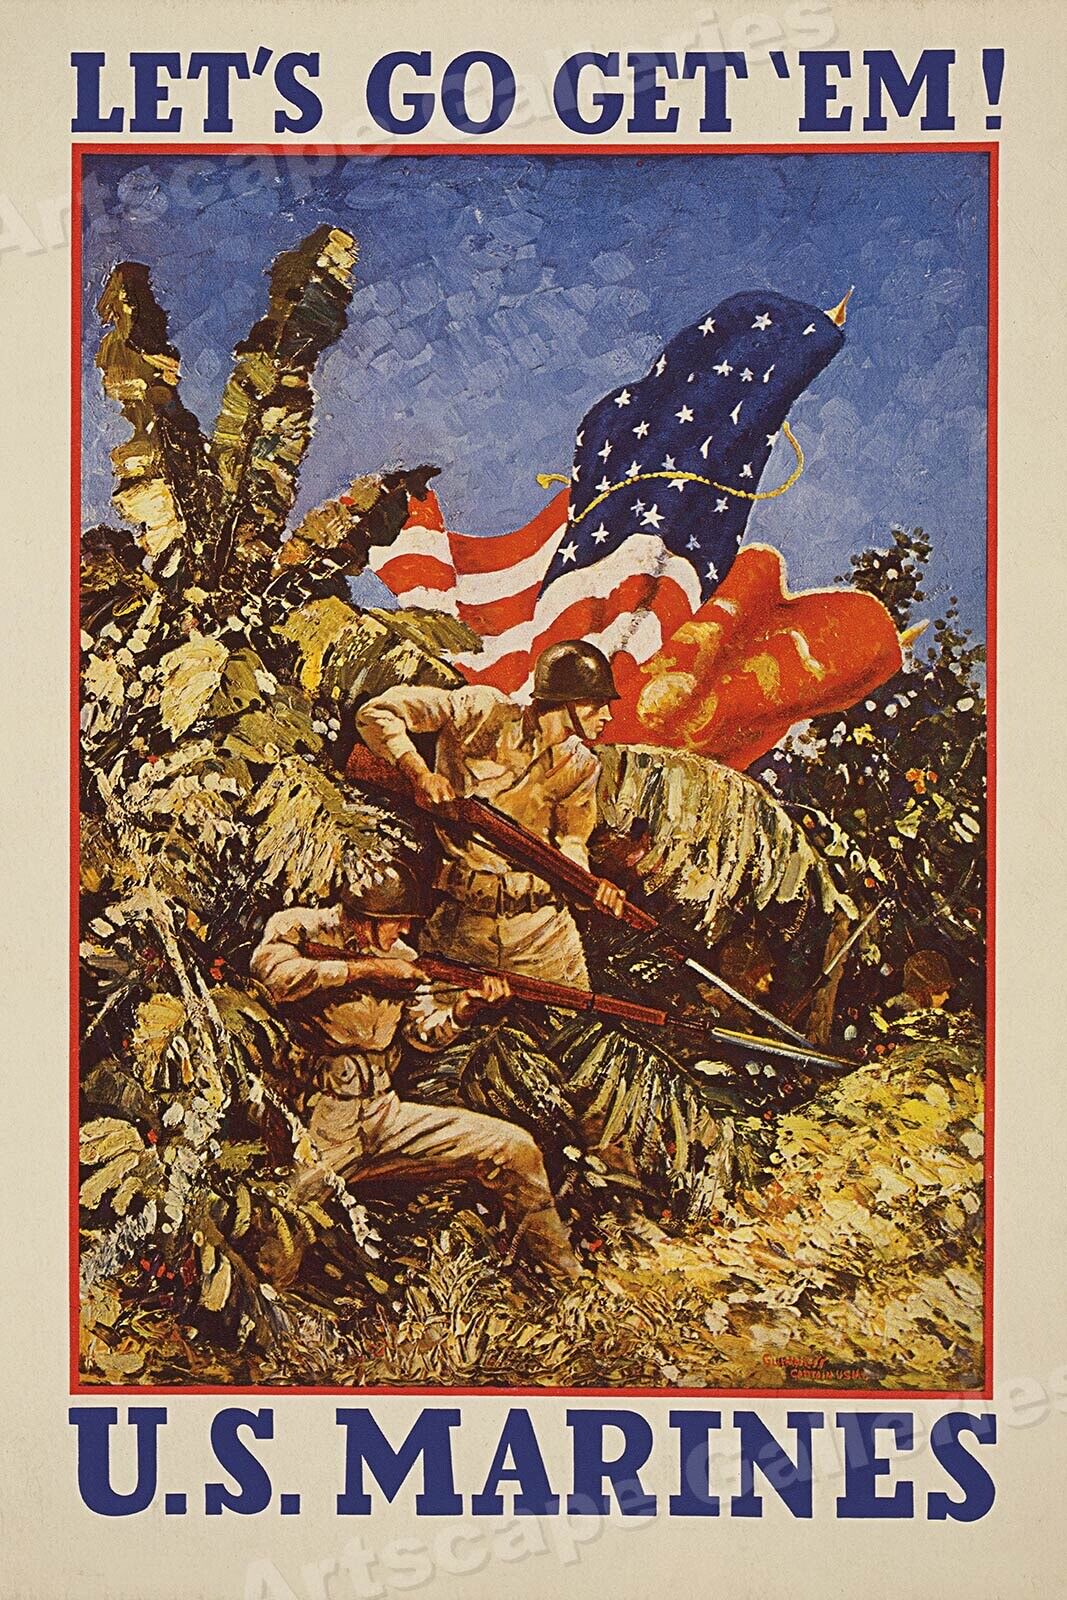 Let's Go Get 'Em 1942 US Marines WWII Recruiting Poster - 24x36